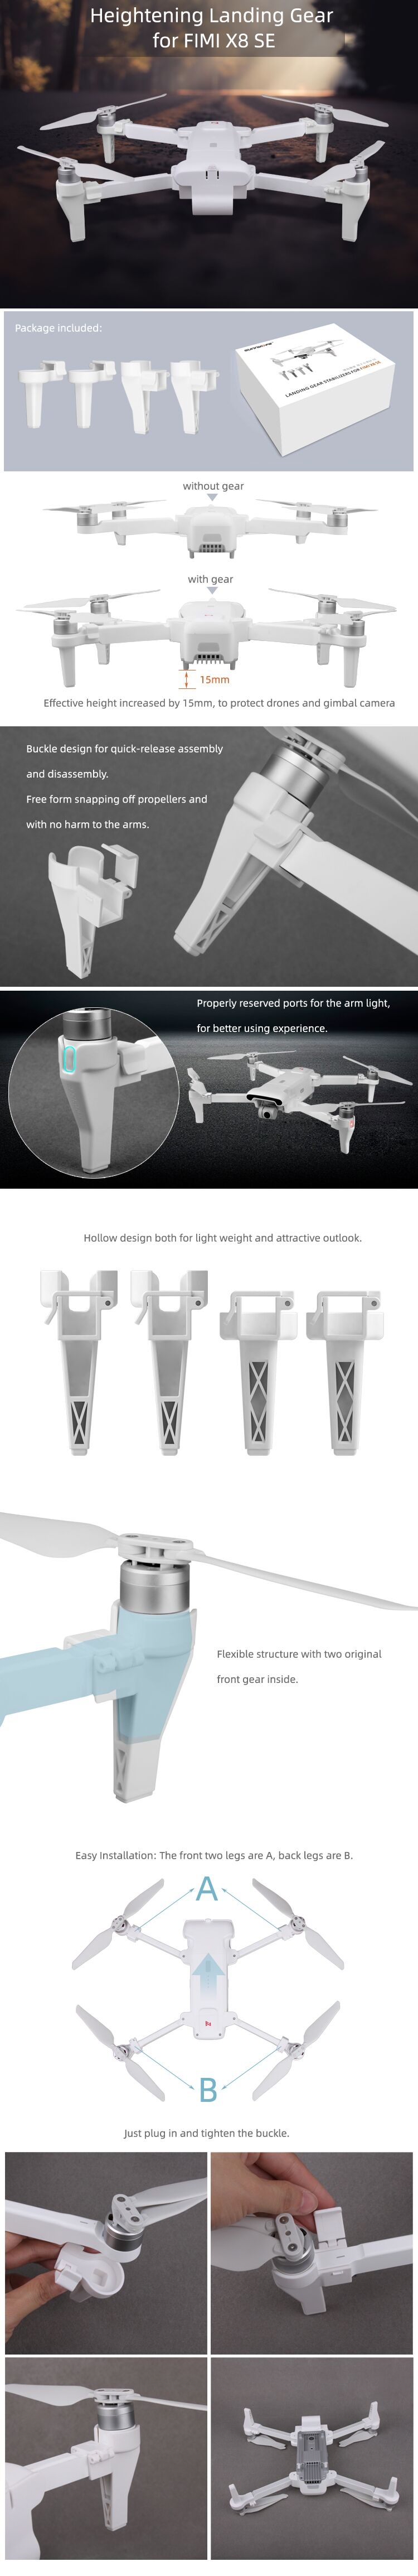 Sunnylife Extended Heighten Landing Gear Gimbal Camera Protector Set for FIMI X8 SE RC Quadcopter